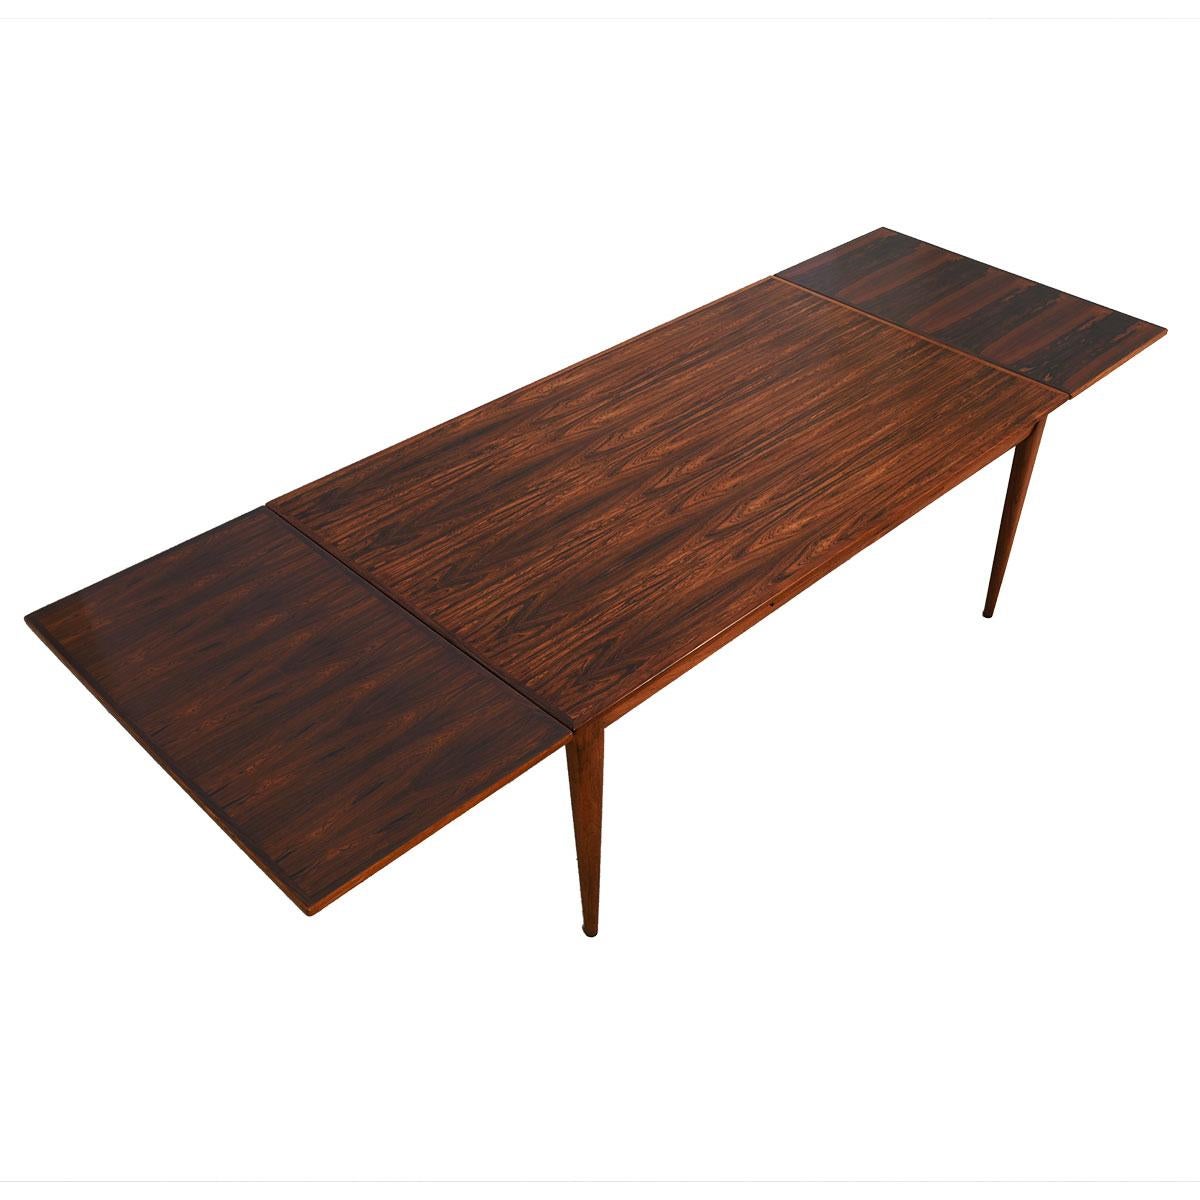 Dramatic and stunning grain on this danish modern dining table enhances its extraordinary length.

A wonderful extra-large danish modern rosewood dining table.
Two self-storing leaves pull out from under the table’s top, each adding 22.75